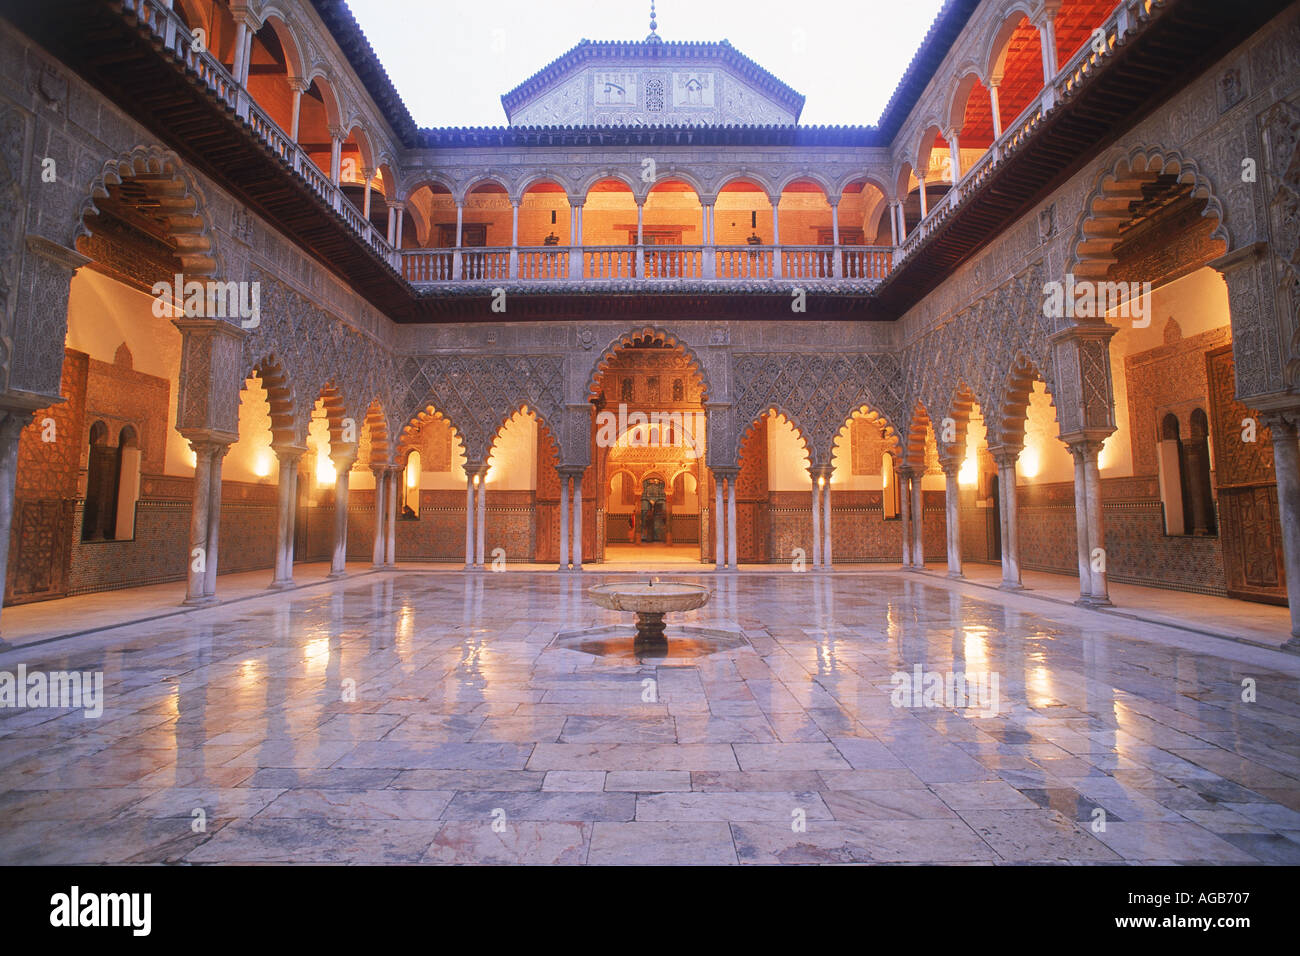 Almohad-Gothic style rooms and courtyards of Alcazar Palace in Seville (Sevilla) Stock Photo